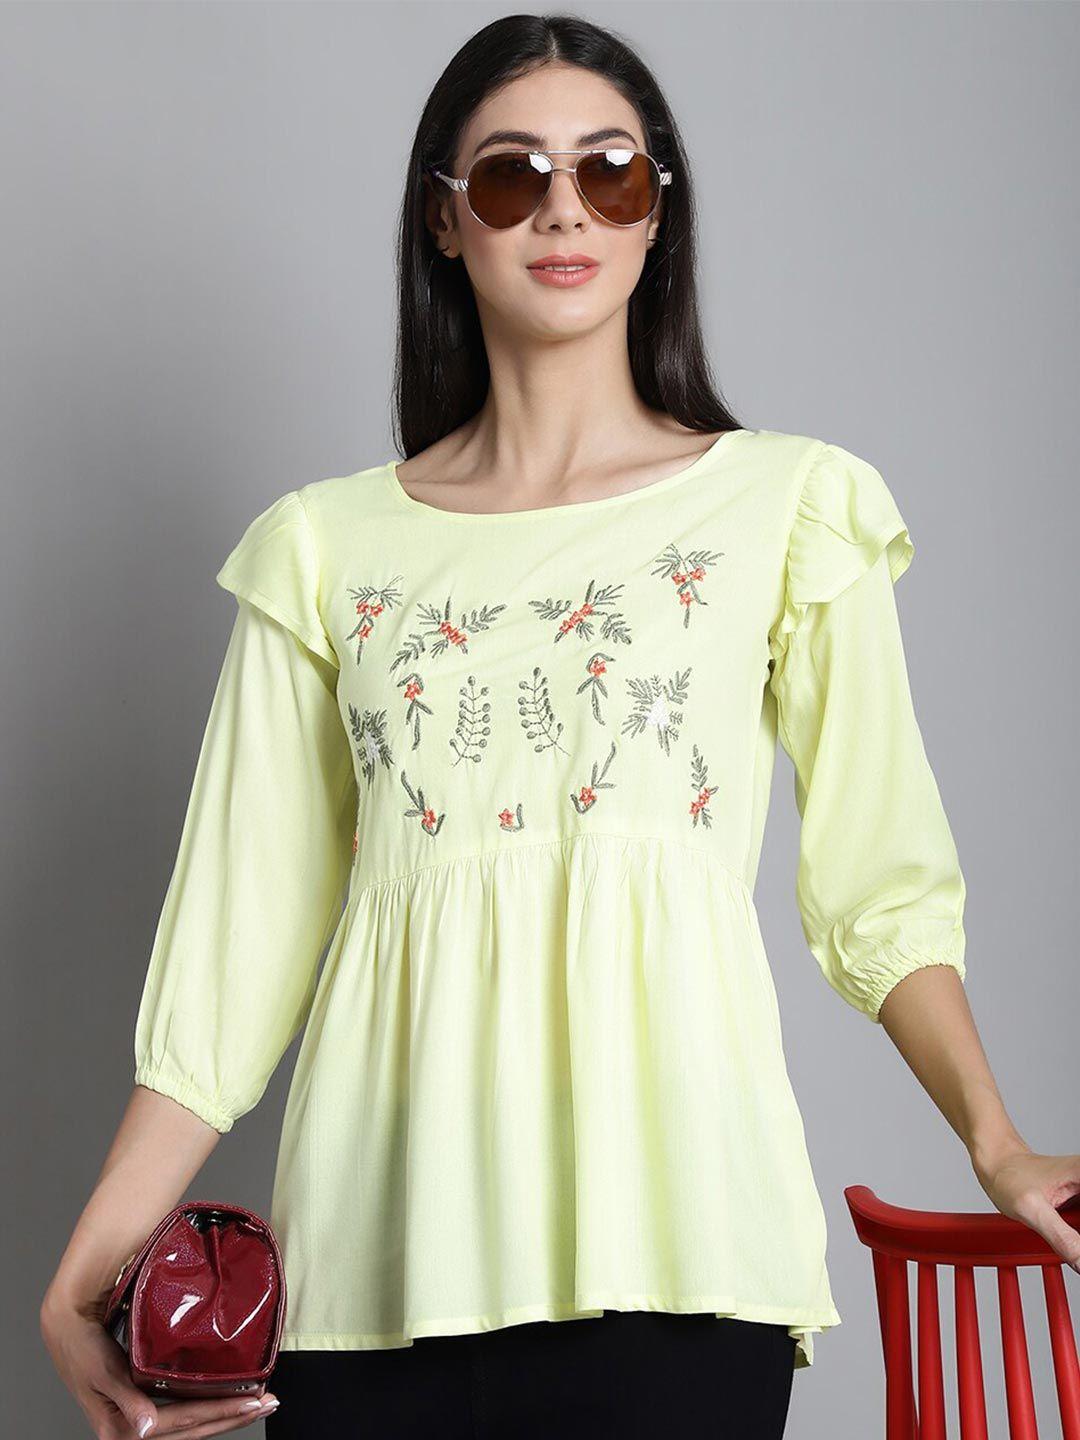 jainish floral embroidered a-line top